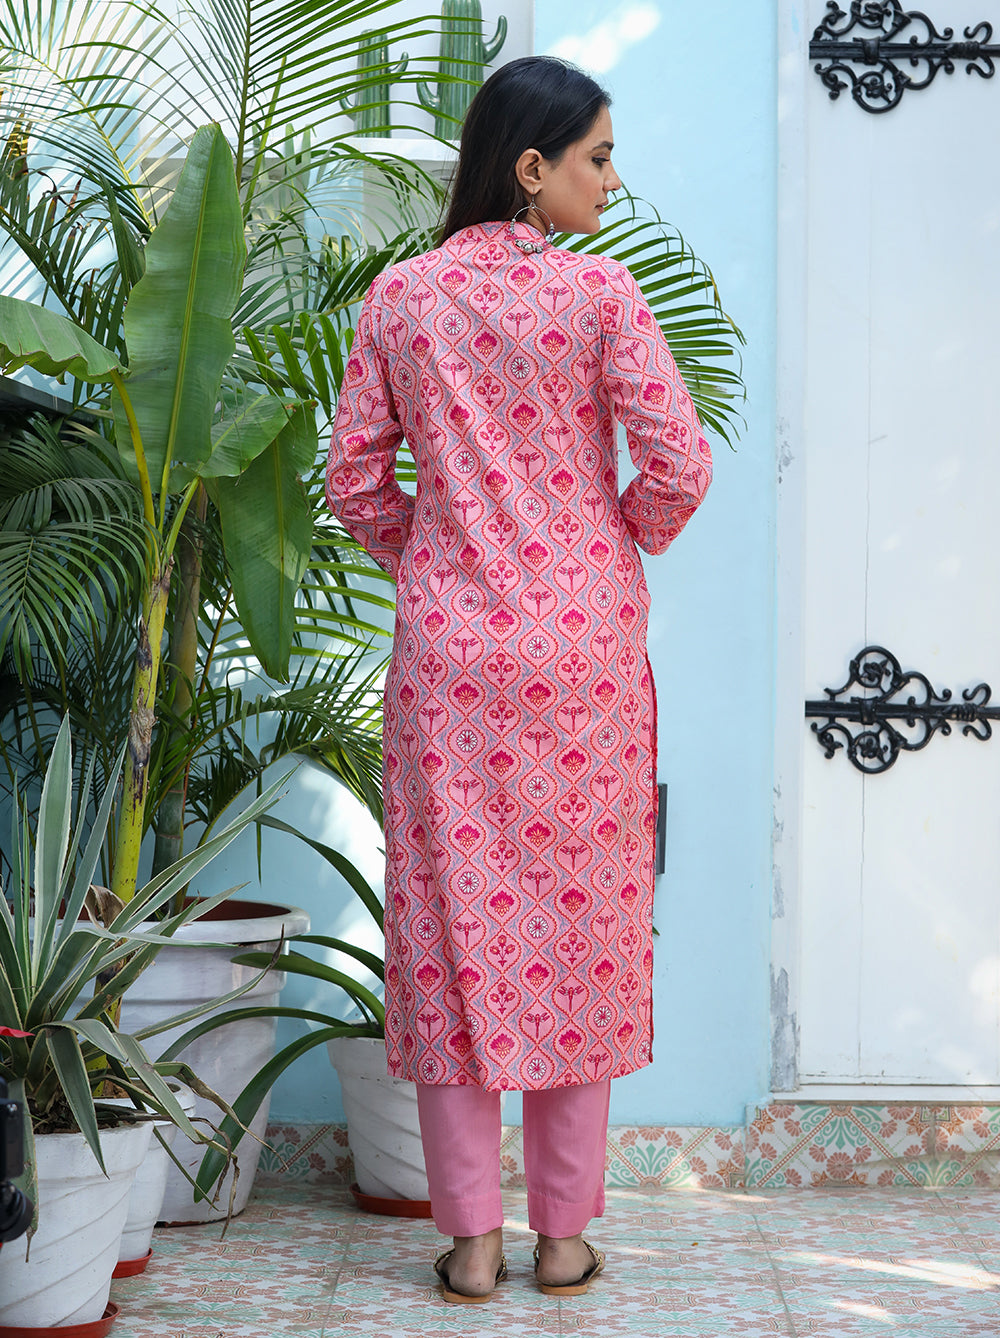 Ethnic Cotton Dress - Buy a Pink Women's Kurti and Pants Online